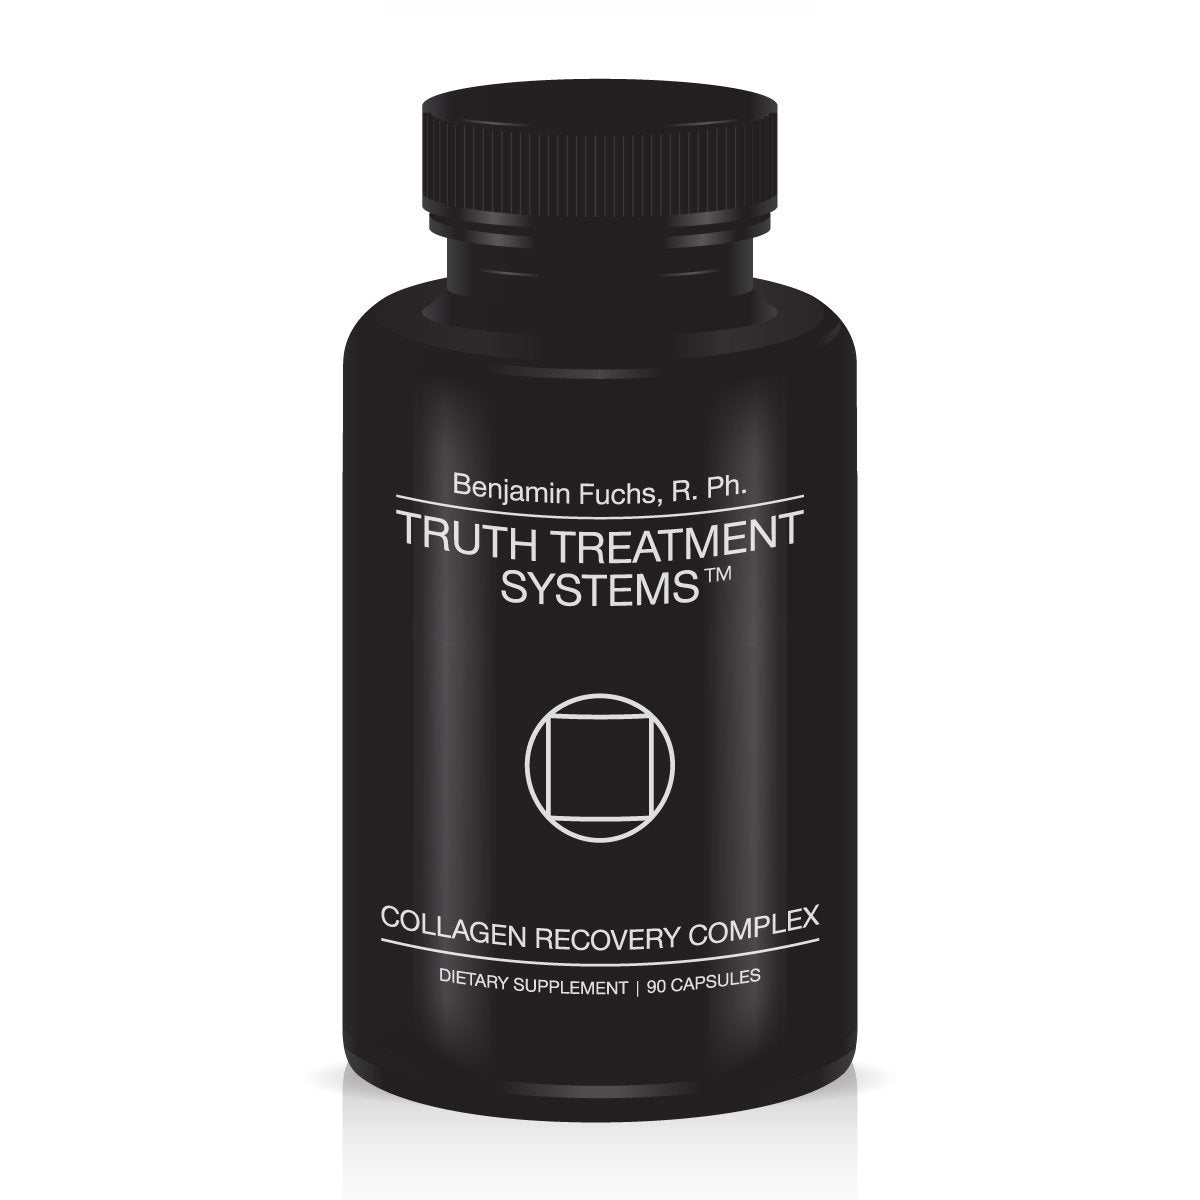 COLLAGEN RECOVERY COMPLEX